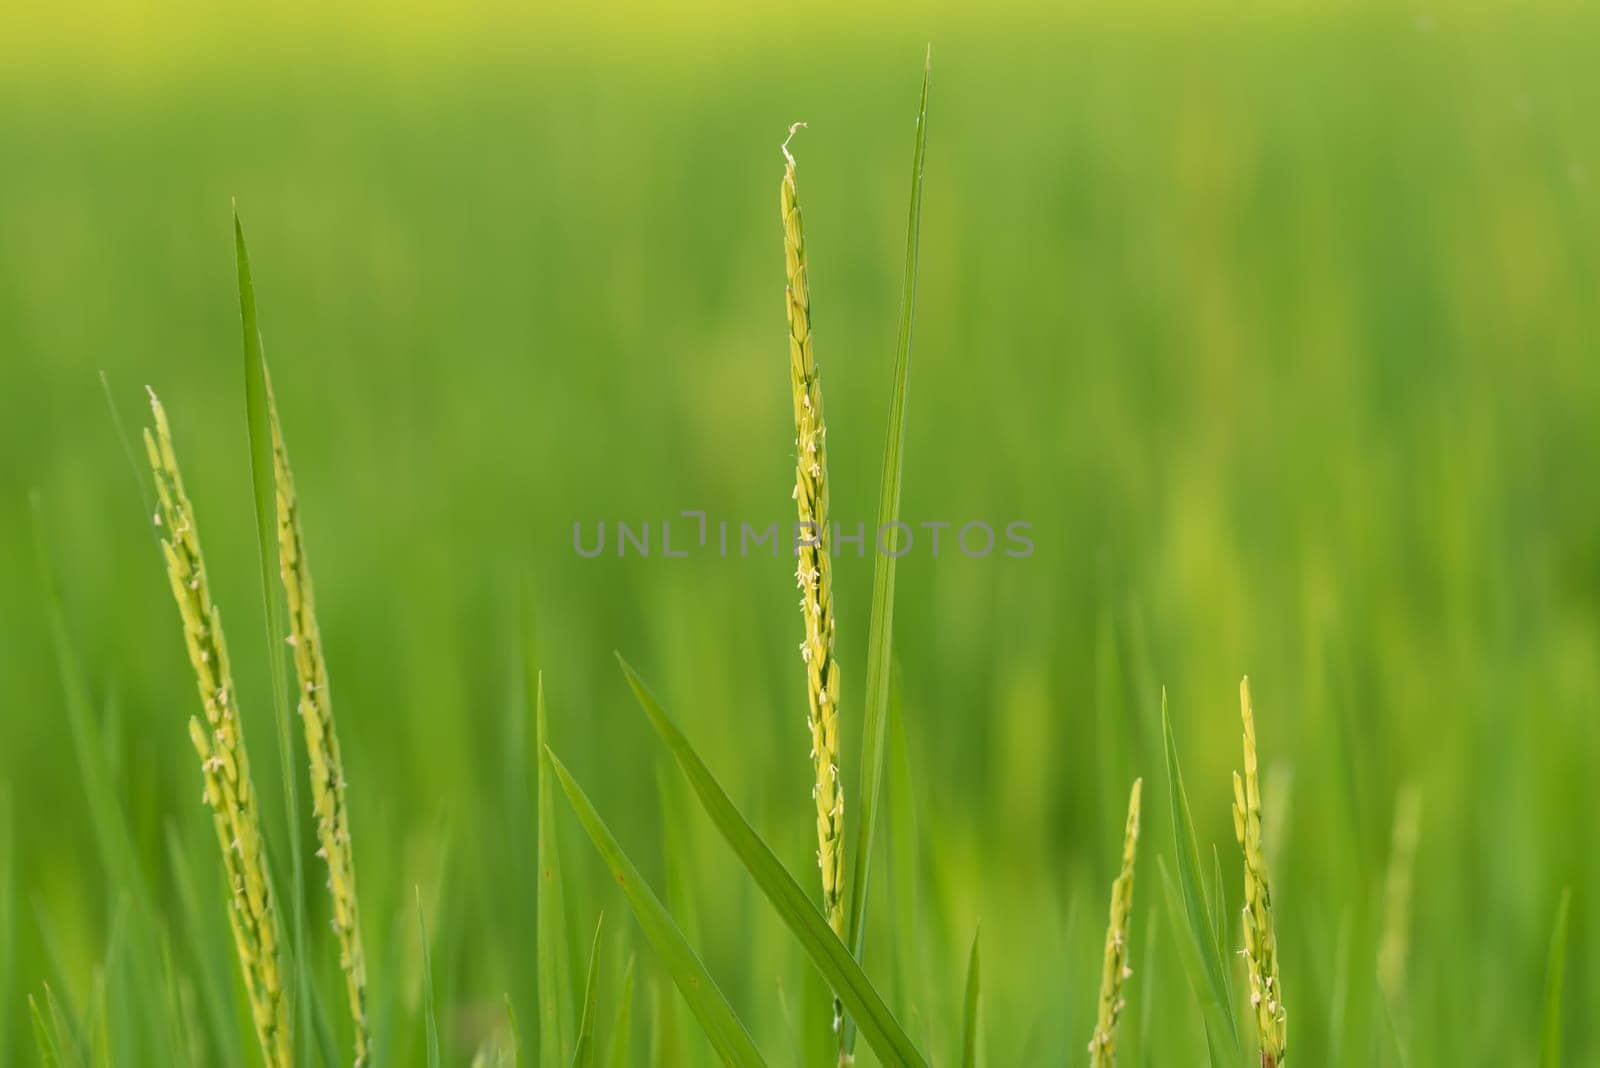 Landscape nature of rice field on rice paddy green color lush growing is a agriculture in asia